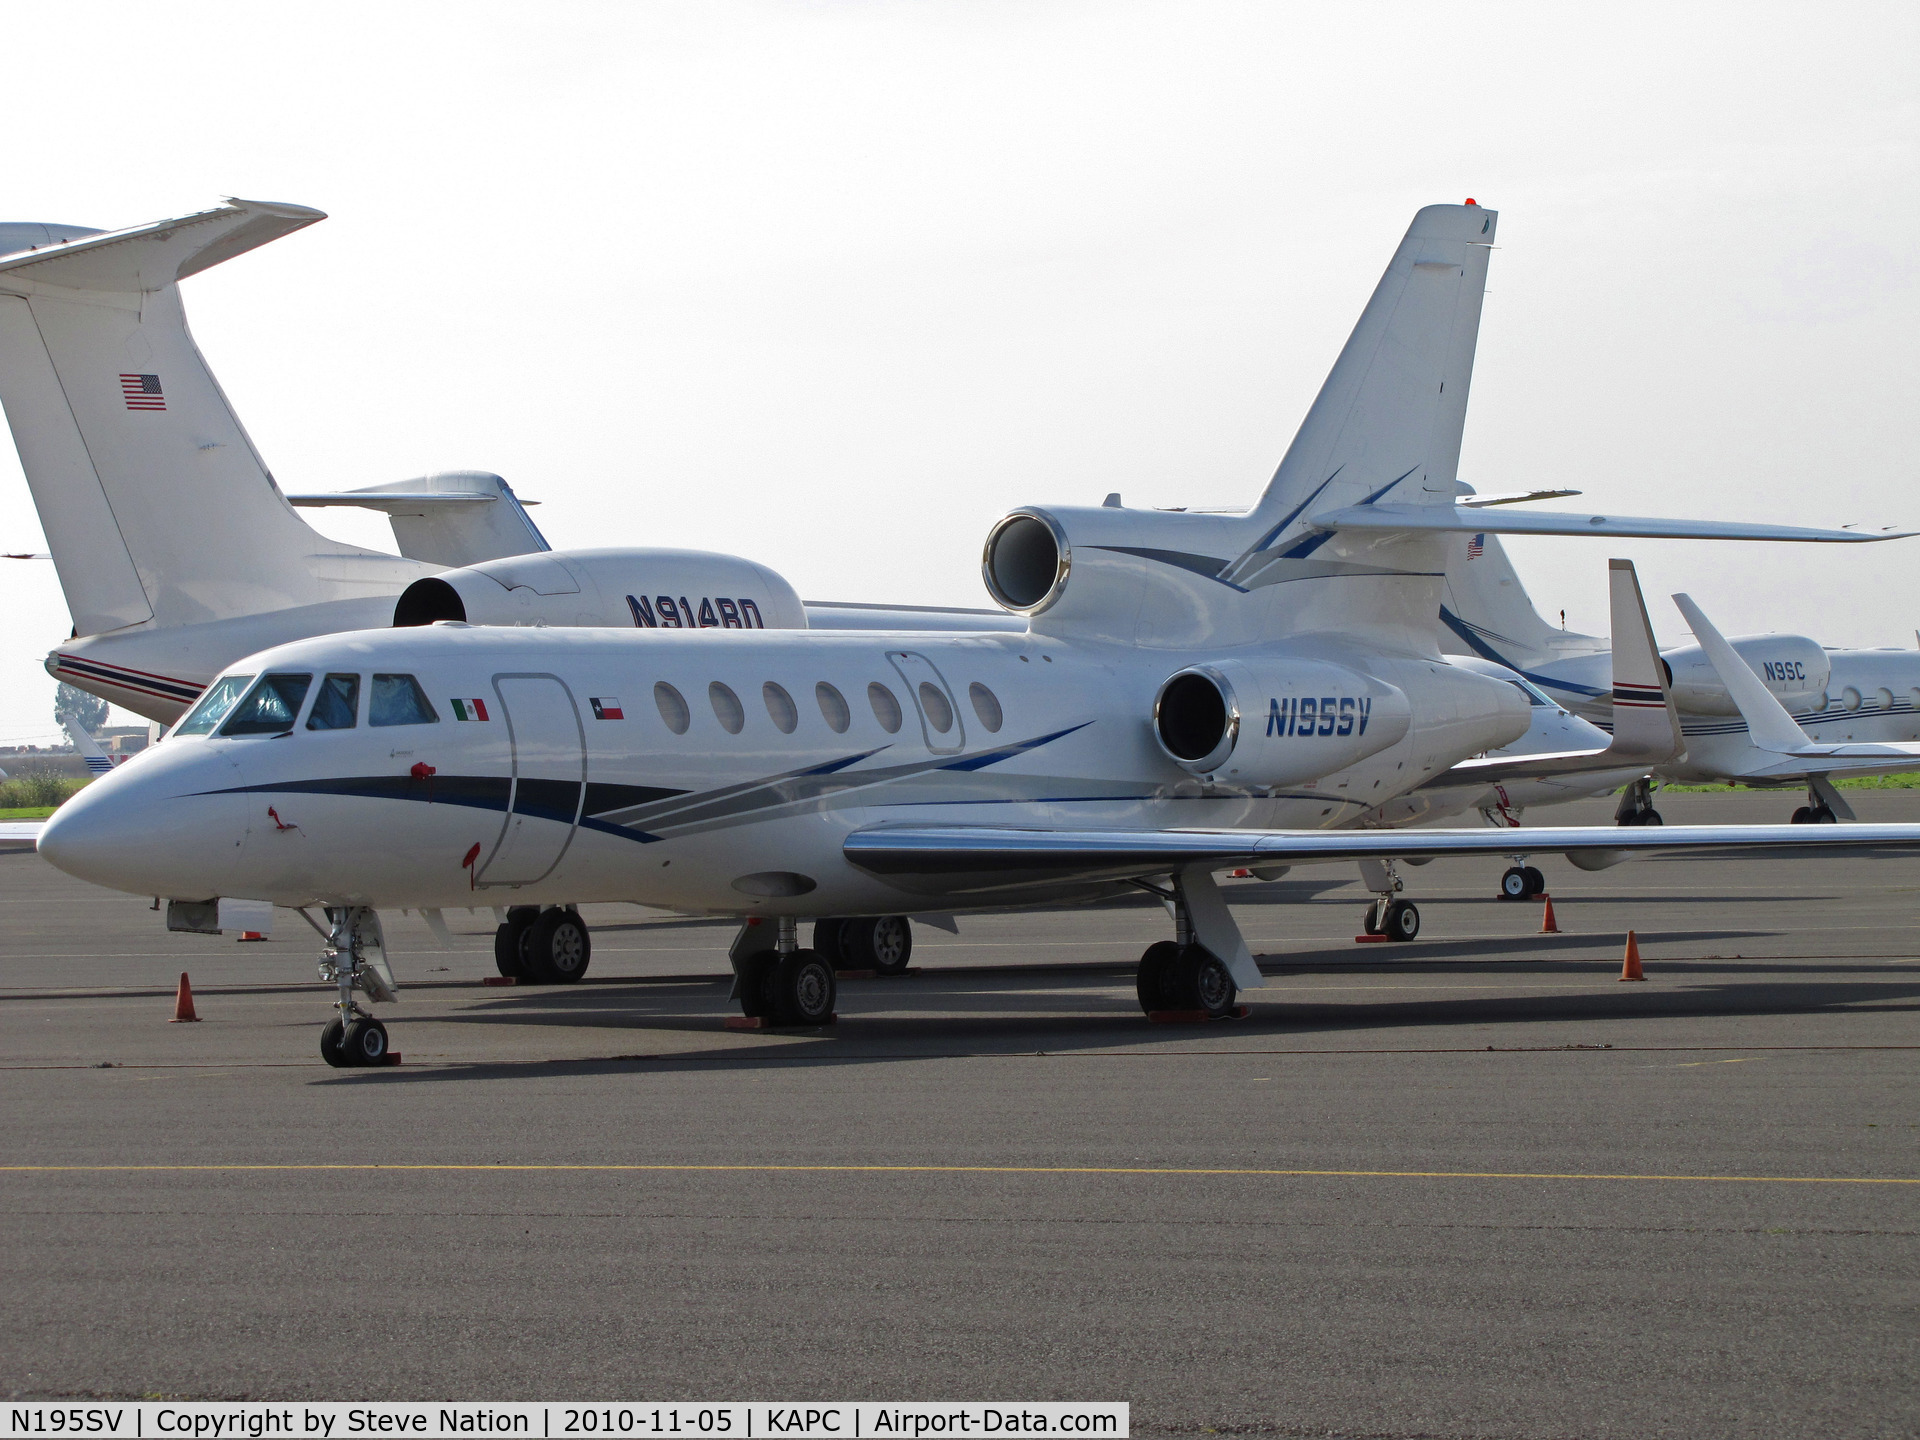 N195SV, 2000 Dassault Mystere Falcon 50 C/N 293, Tight fit on the Napa heavy jet ramp - Silver Ventures 2000 Falcon 50 N195SV, Dillards, Inc. 2002 G-V N914BD and SCI Texas Funeral Services 2009 G450 N9SC